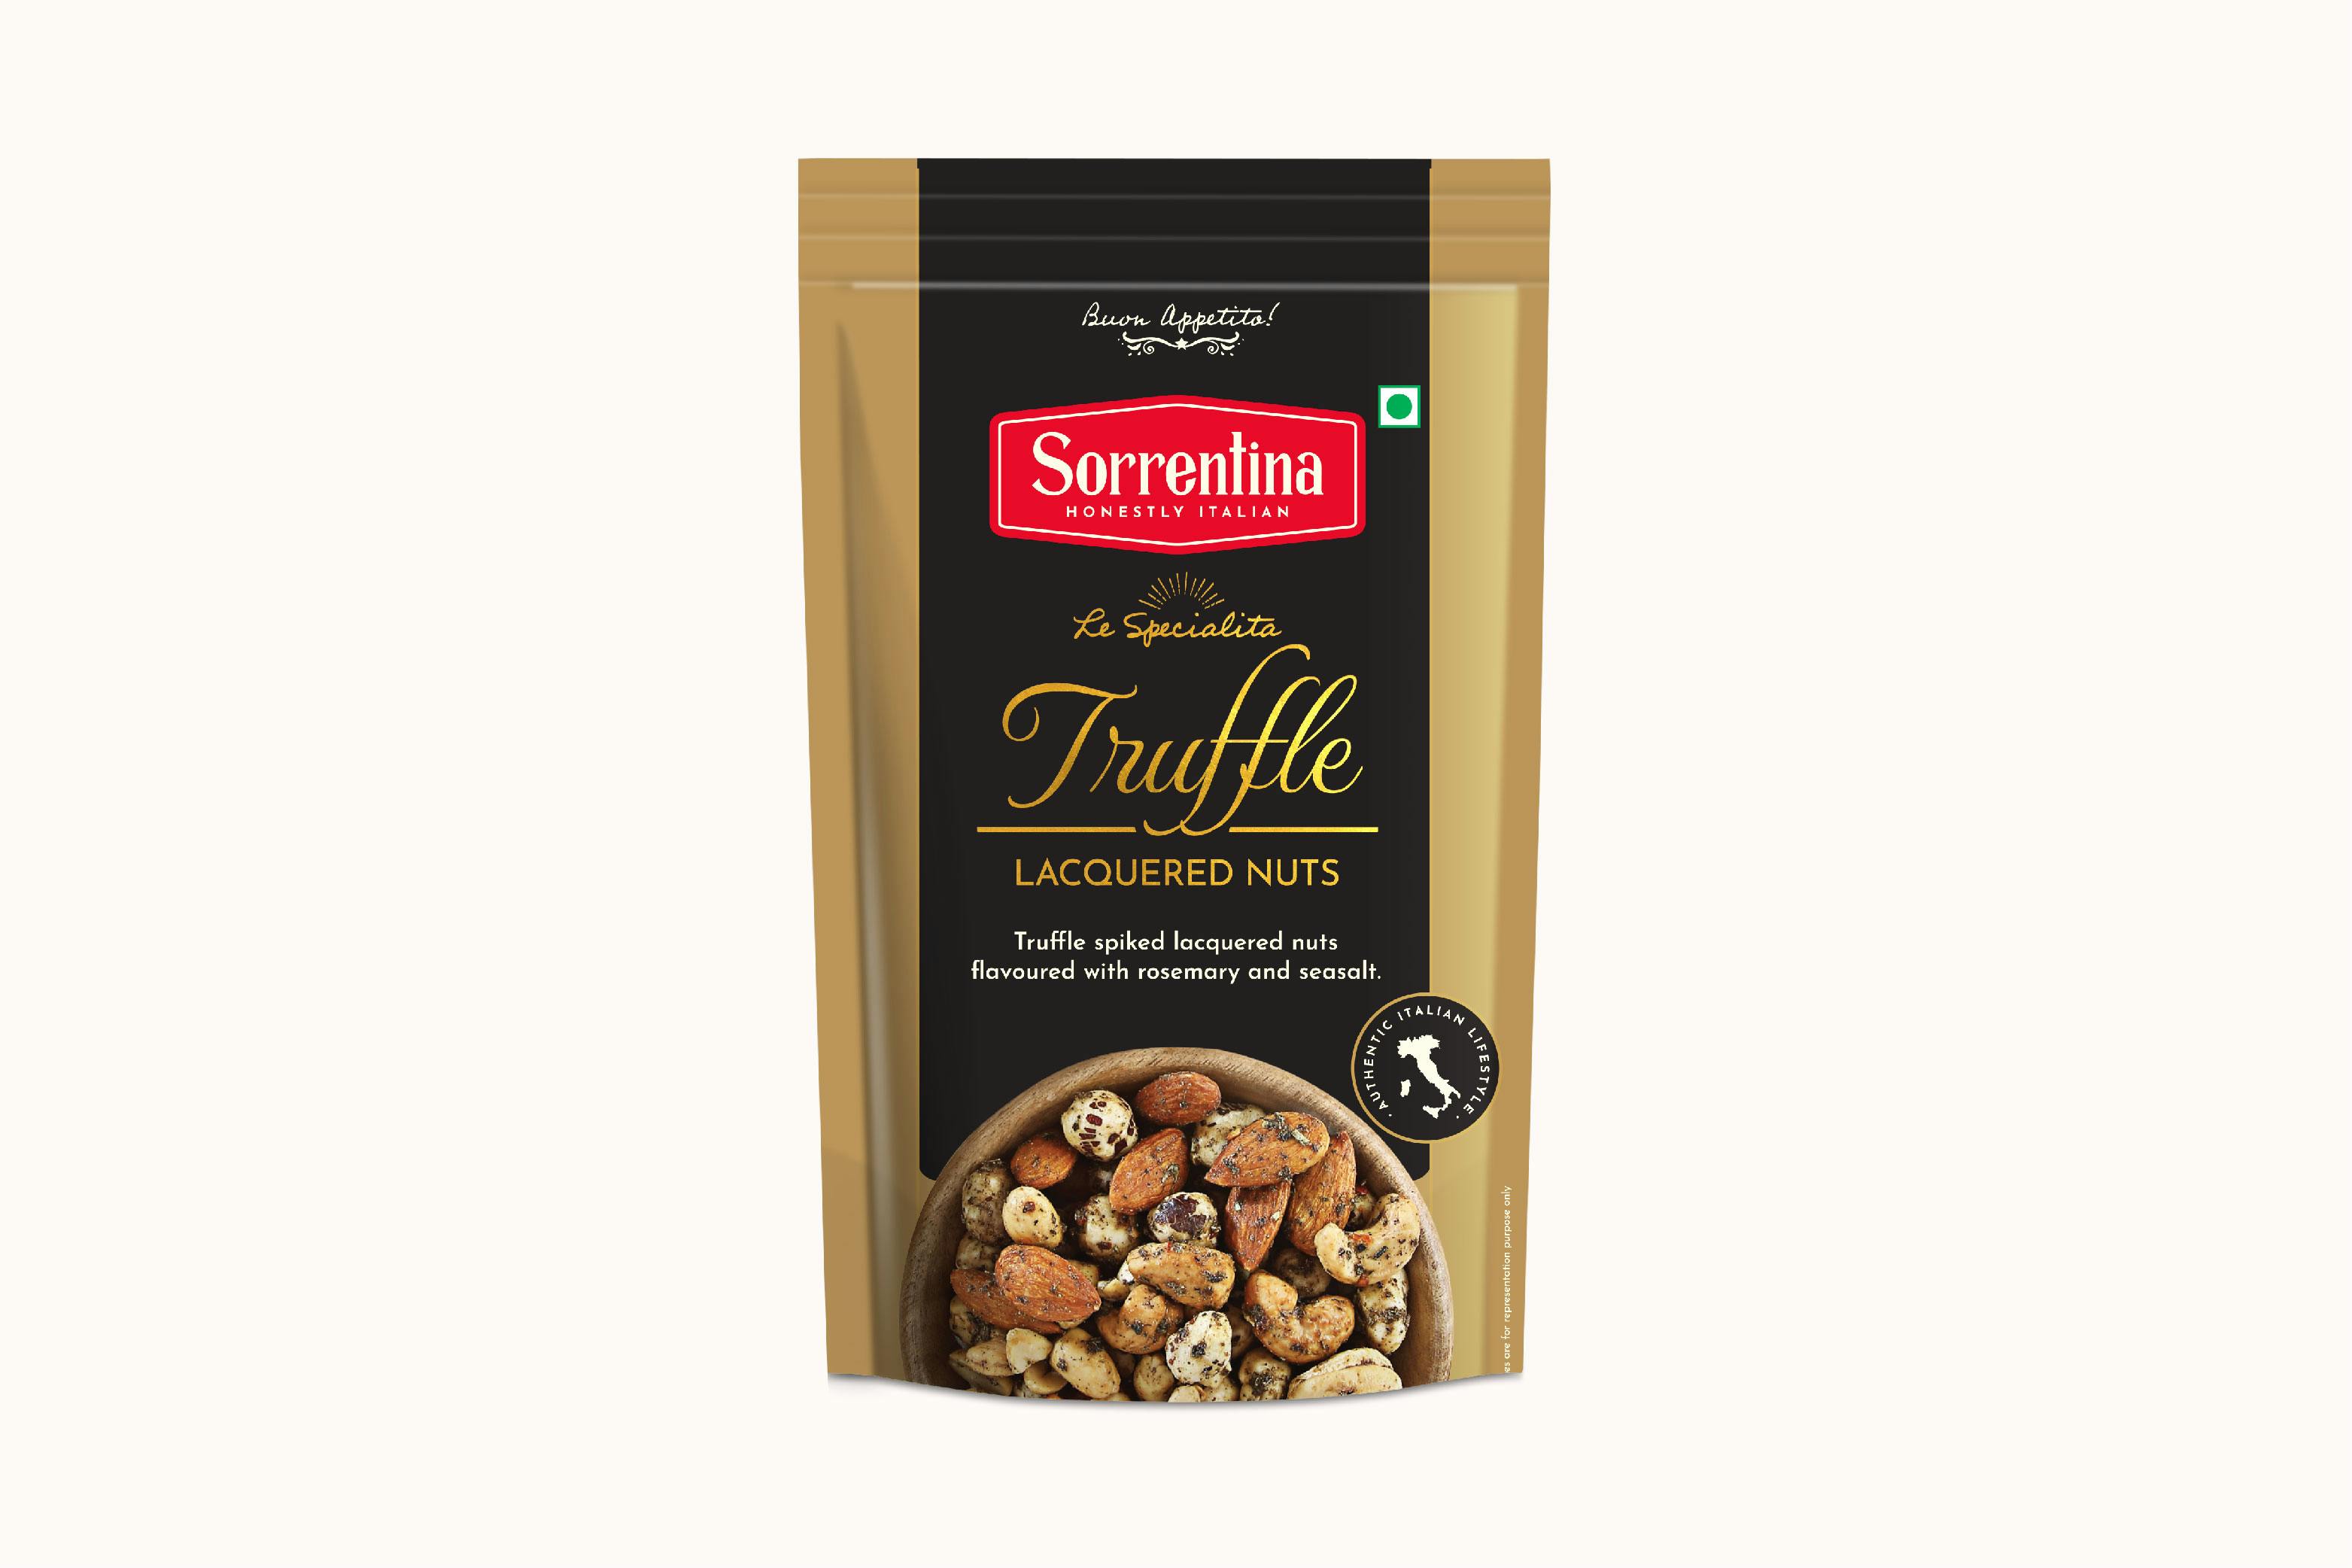 Sorrentina Truffle Lacquered Nuts